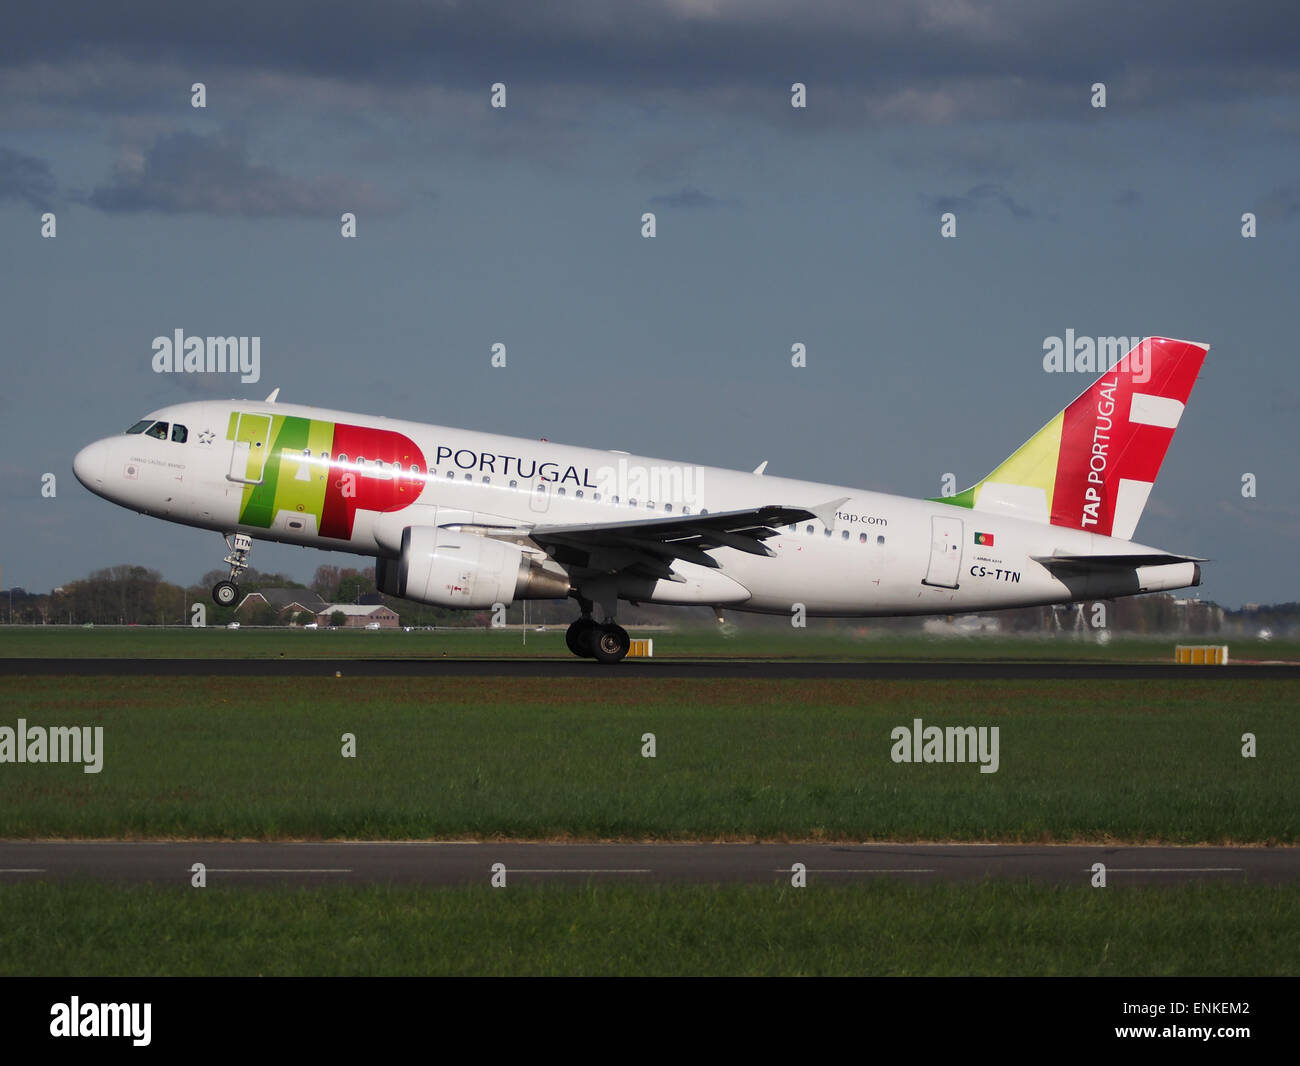 CS-TTN TAP - Air Portugal Airbus A319-111 - cn 1120takeoff from Polderbaan, Schiphol (AMS - EHAM) at sunset Stock Photo